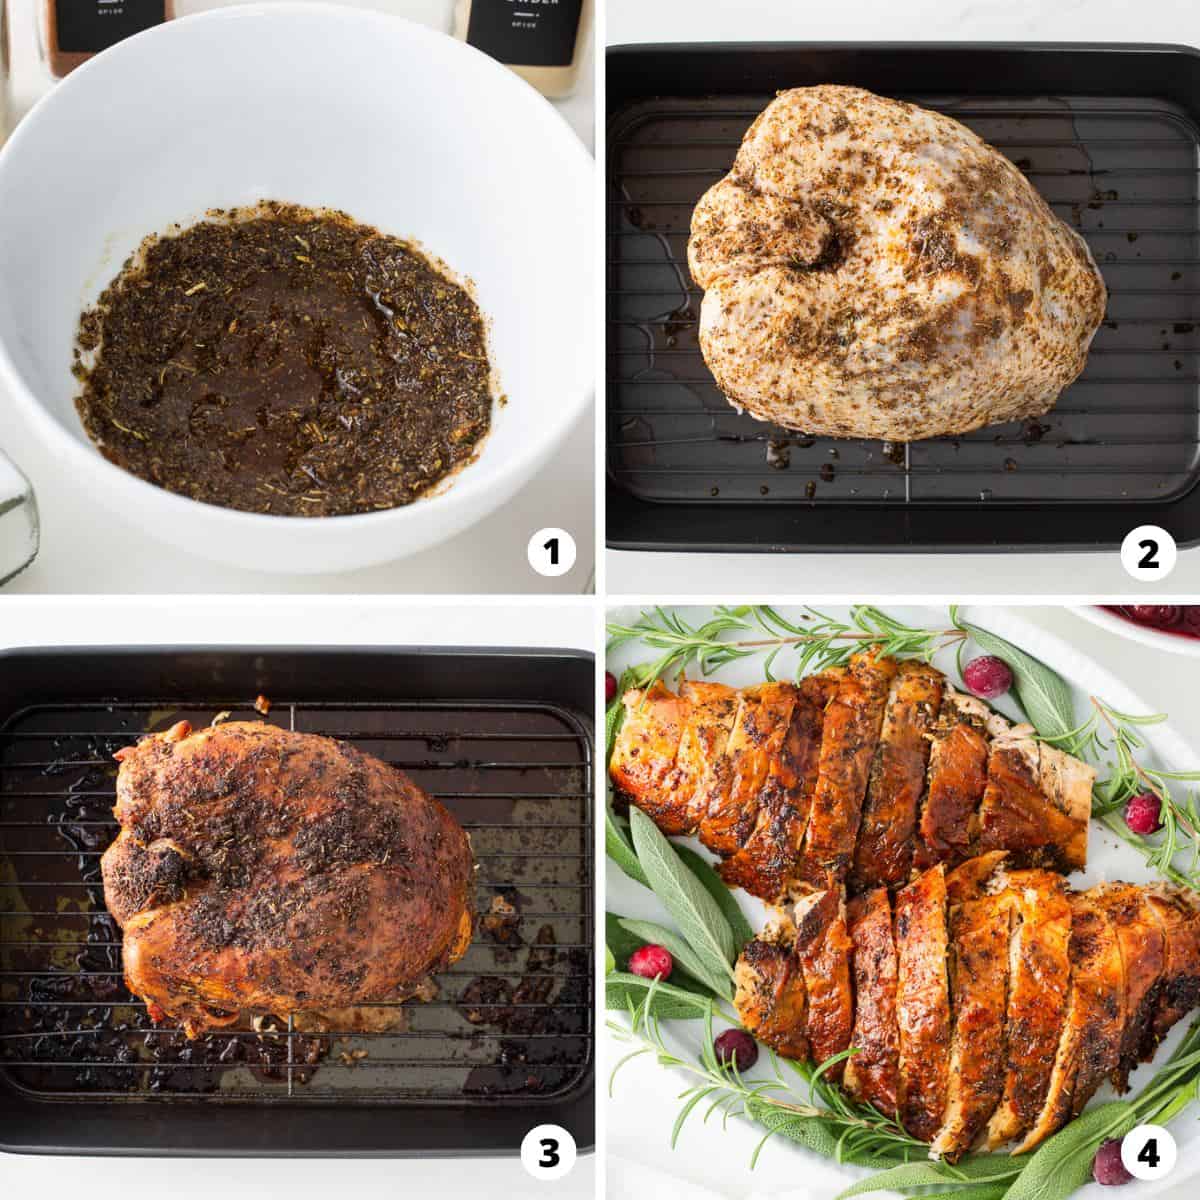 Showing how to cook a turkey breast in a 4 step collage.